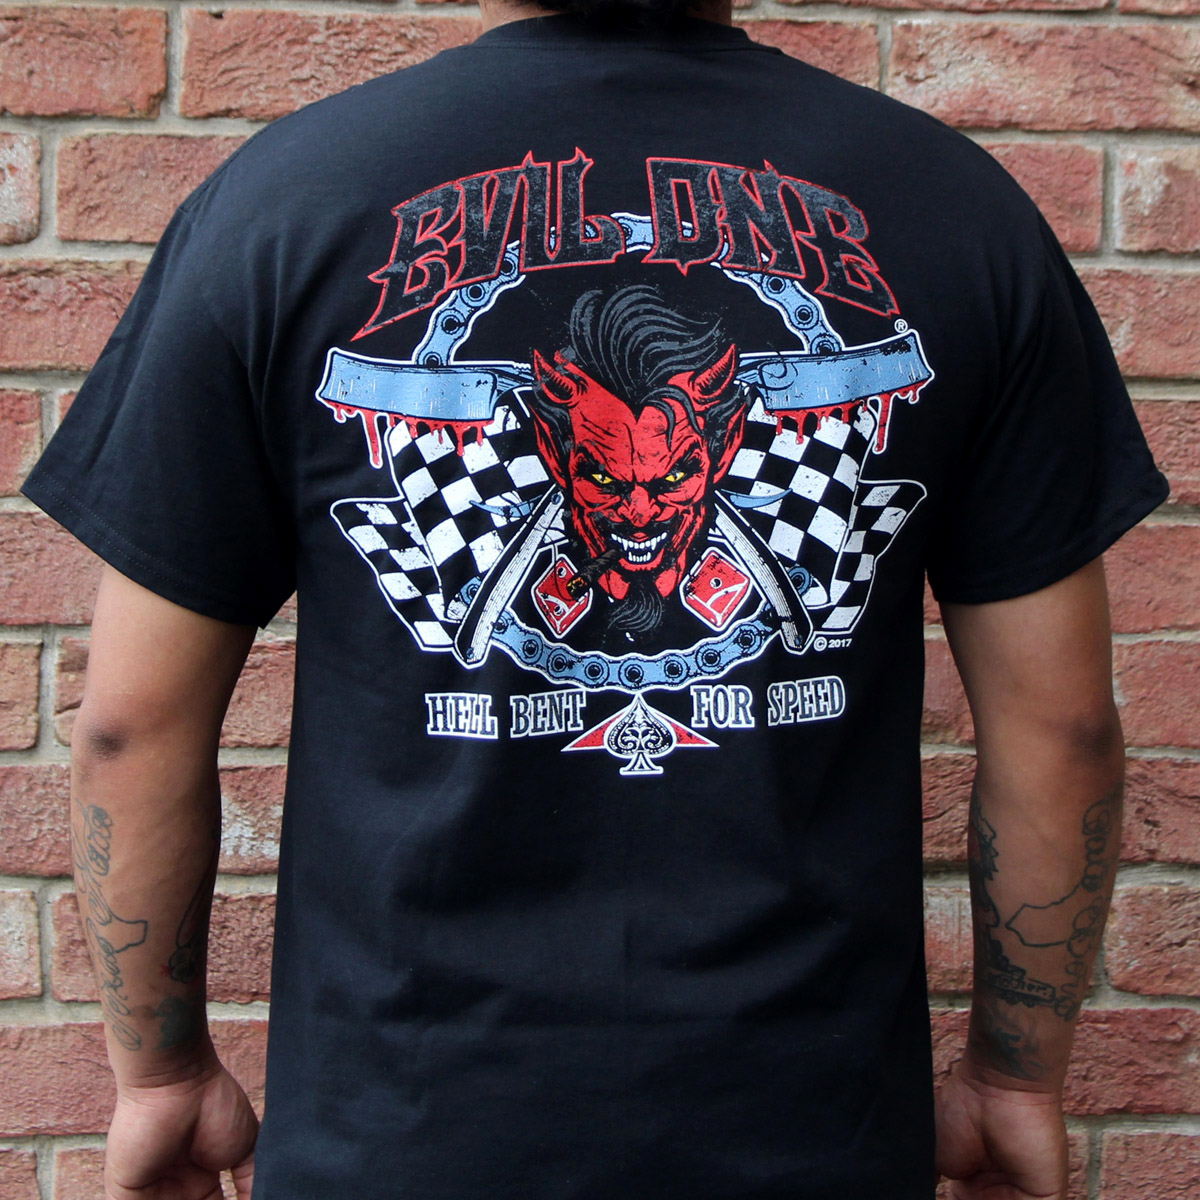 Hell Bent Speed Red Devil T-Shirt Evil One